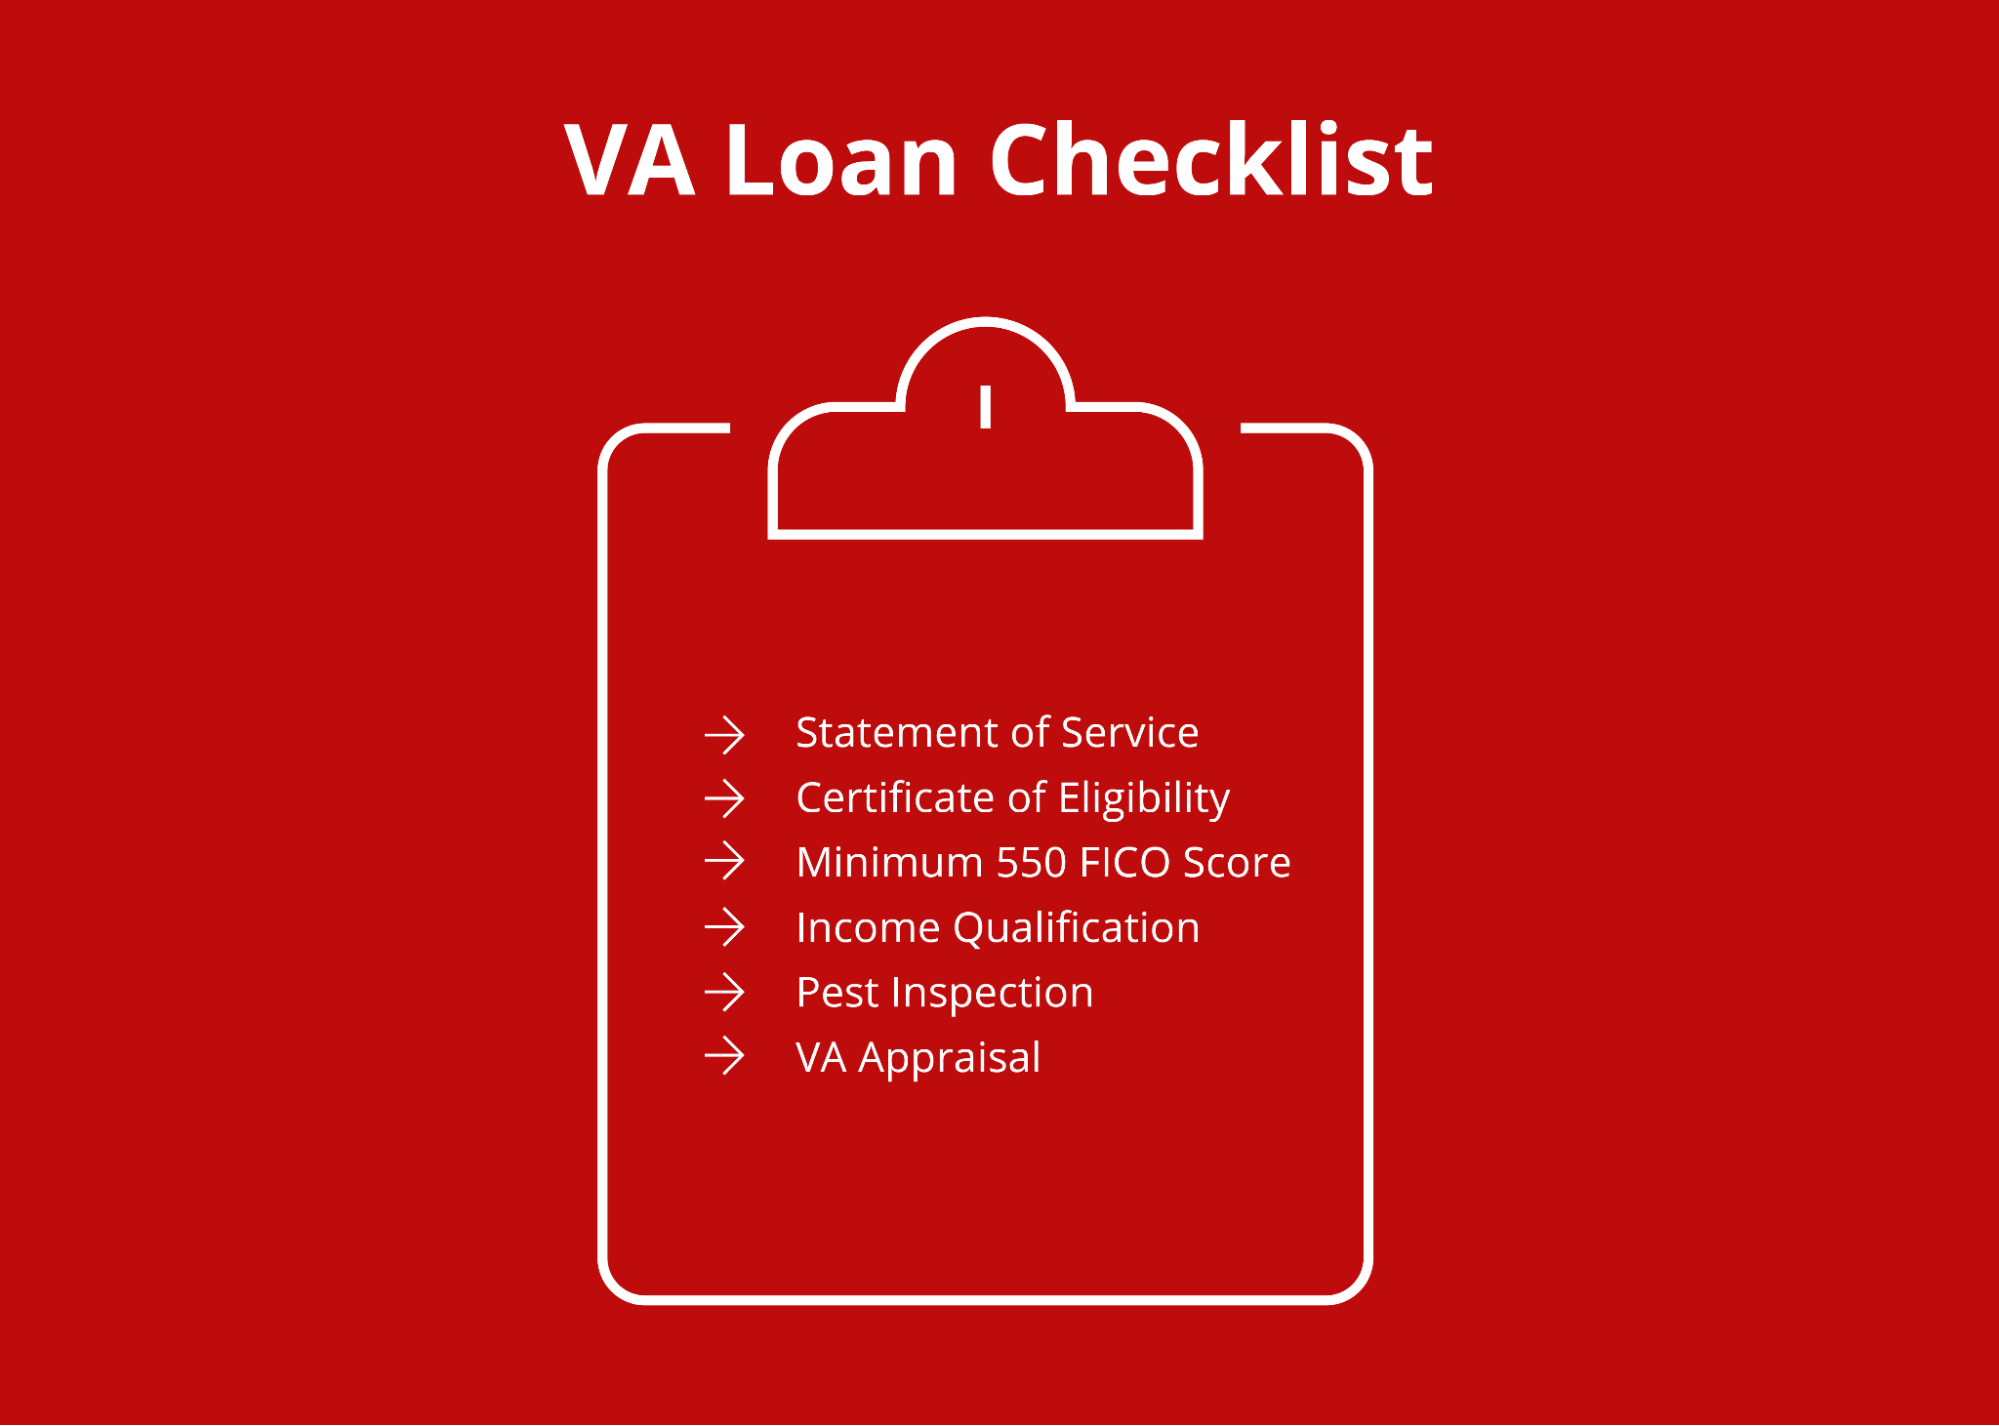 Graphic titled “VA Loan Checklist” featuring a clipboard with bullet points that include: Statement of Service, Certificate of Eligibility, Minimum 500 FICO Score, Income Qualification, Pest Inspection, VA Appraisal”.